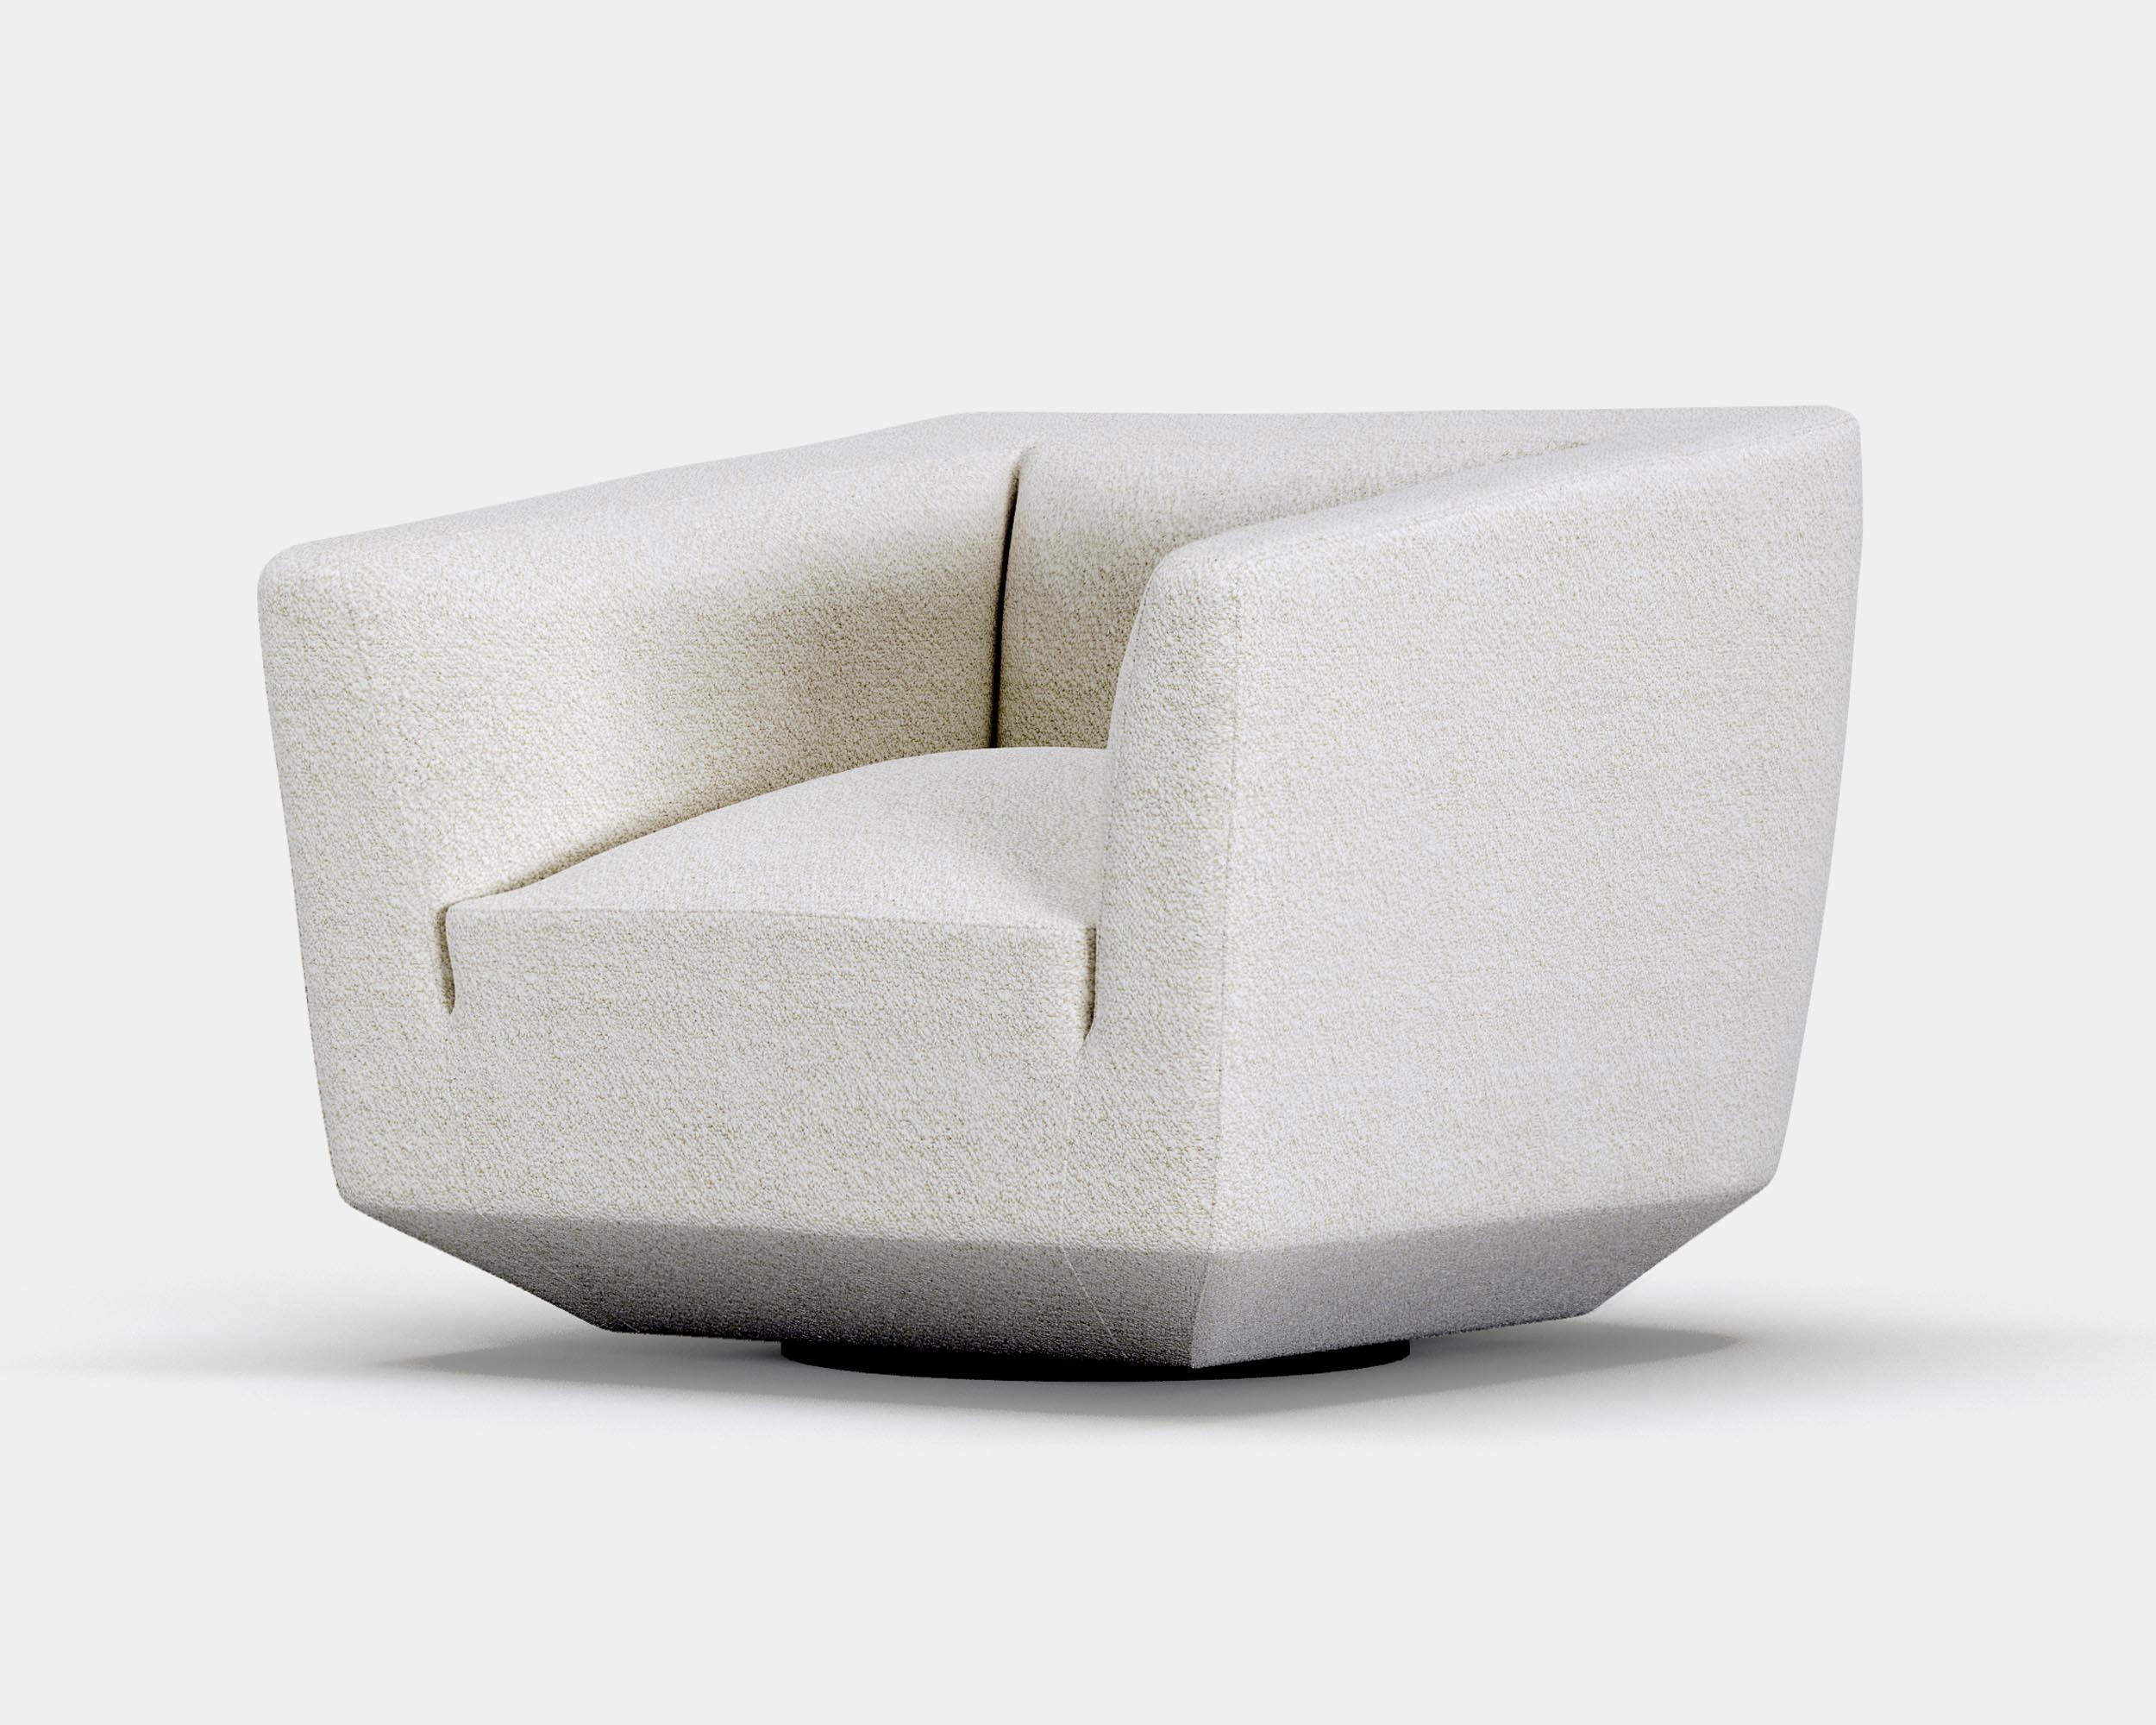 Panis sofa by Amura Lab.
Model 583.

Dimensions : H. 70 x 245 x 92 cm.

Fabric reference in picture : Ecume par Dedar (price can be different for this reference)

More modules available in different fabrics and colors.
 
“Soft shapes declinable in